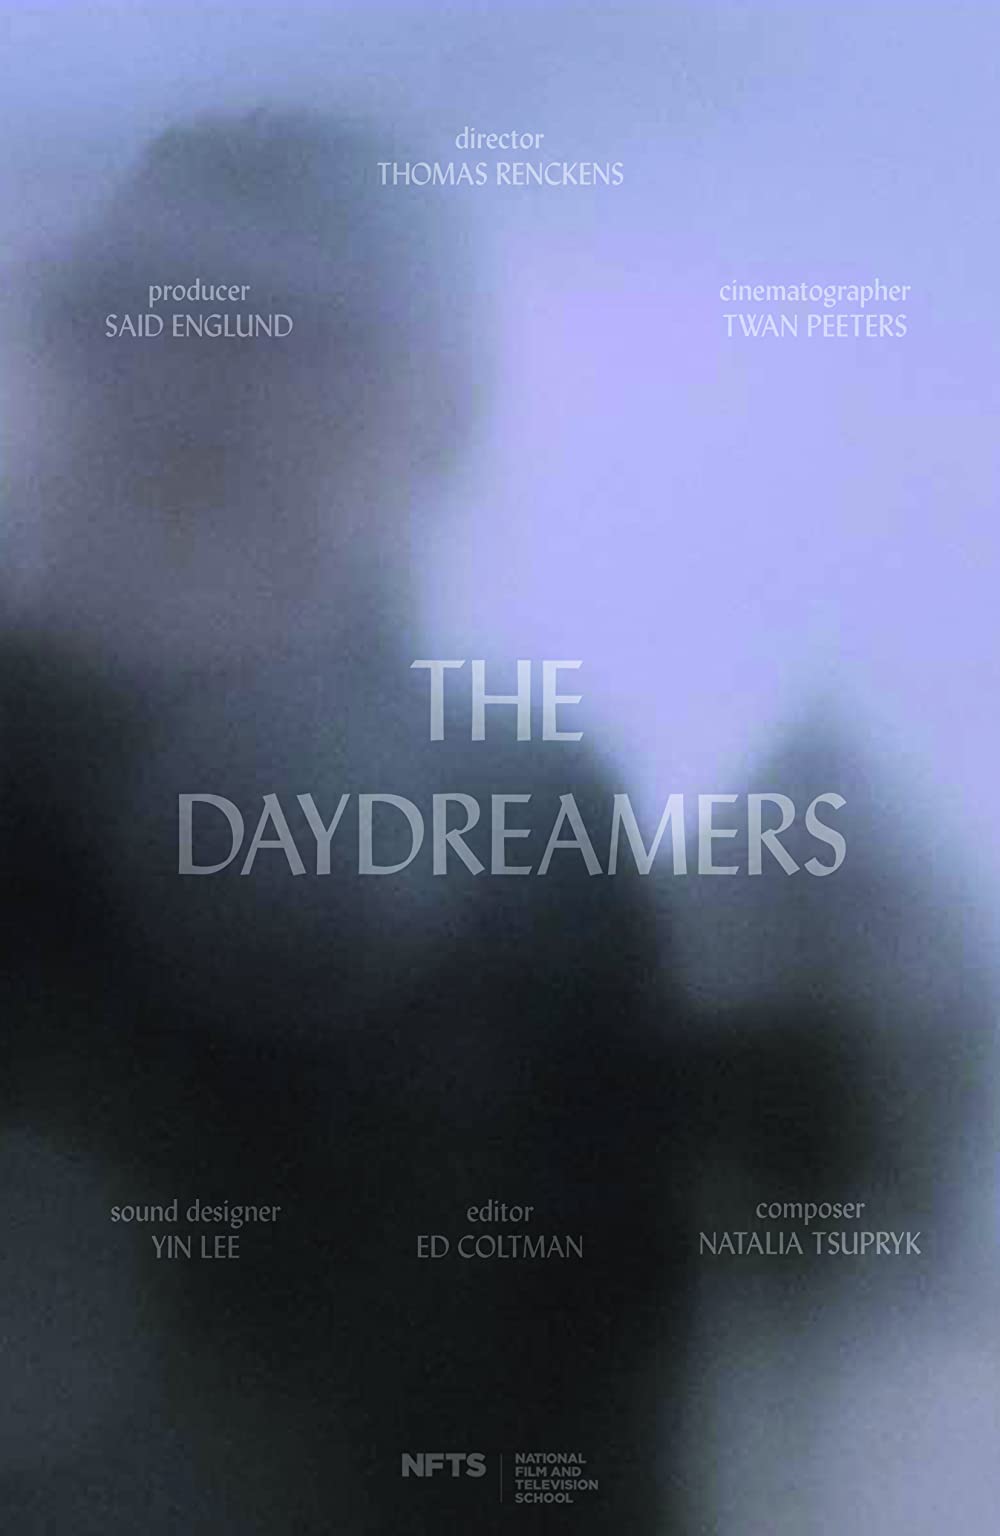 The Daydreamers Documentary; New Screenings